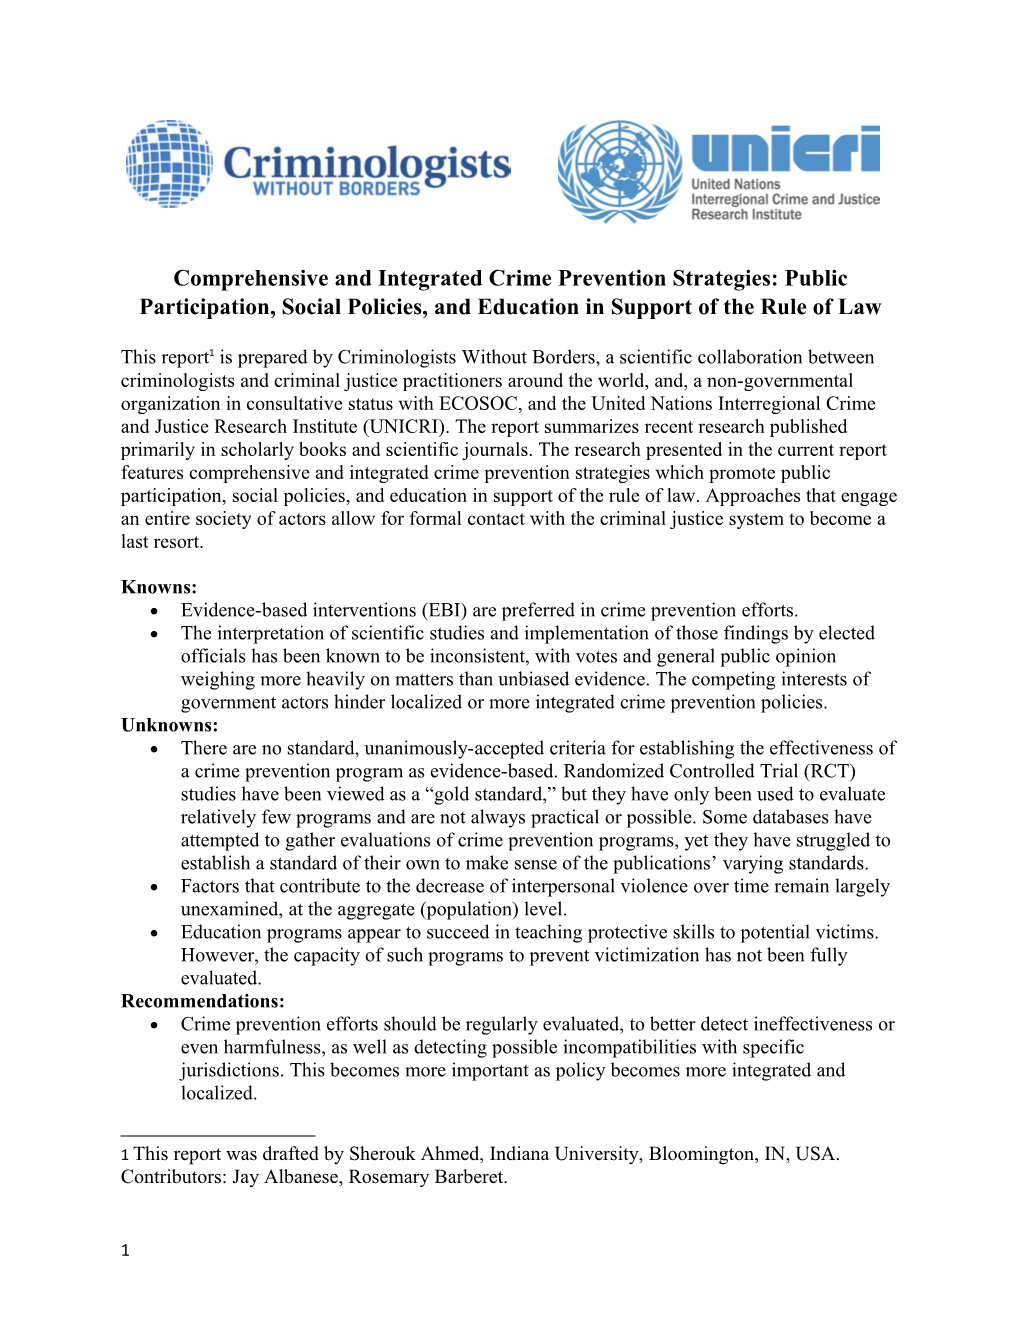 Comprehensive and Integrated Crime Prevention Strategies: Public Participation, Social